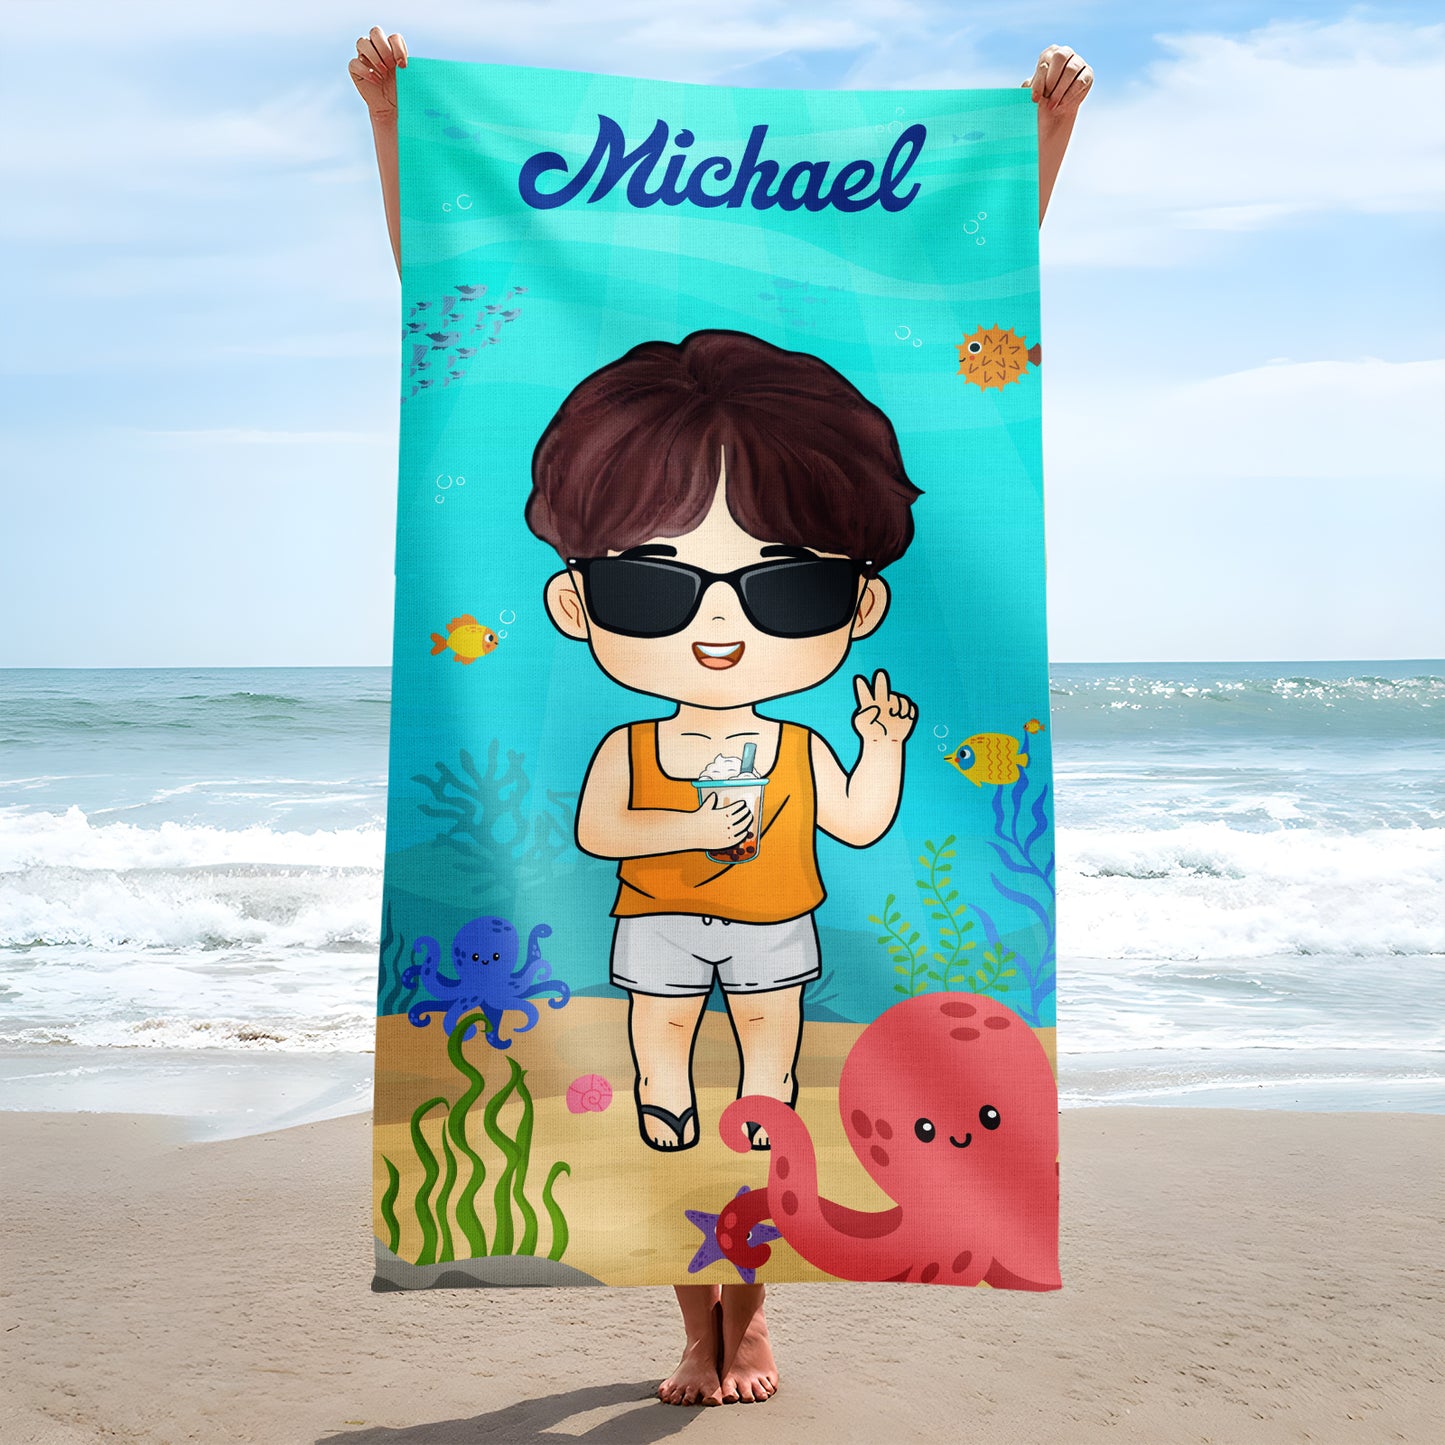 Family - Summer, Beach, Pool, Travel - Personalized Beach Towel